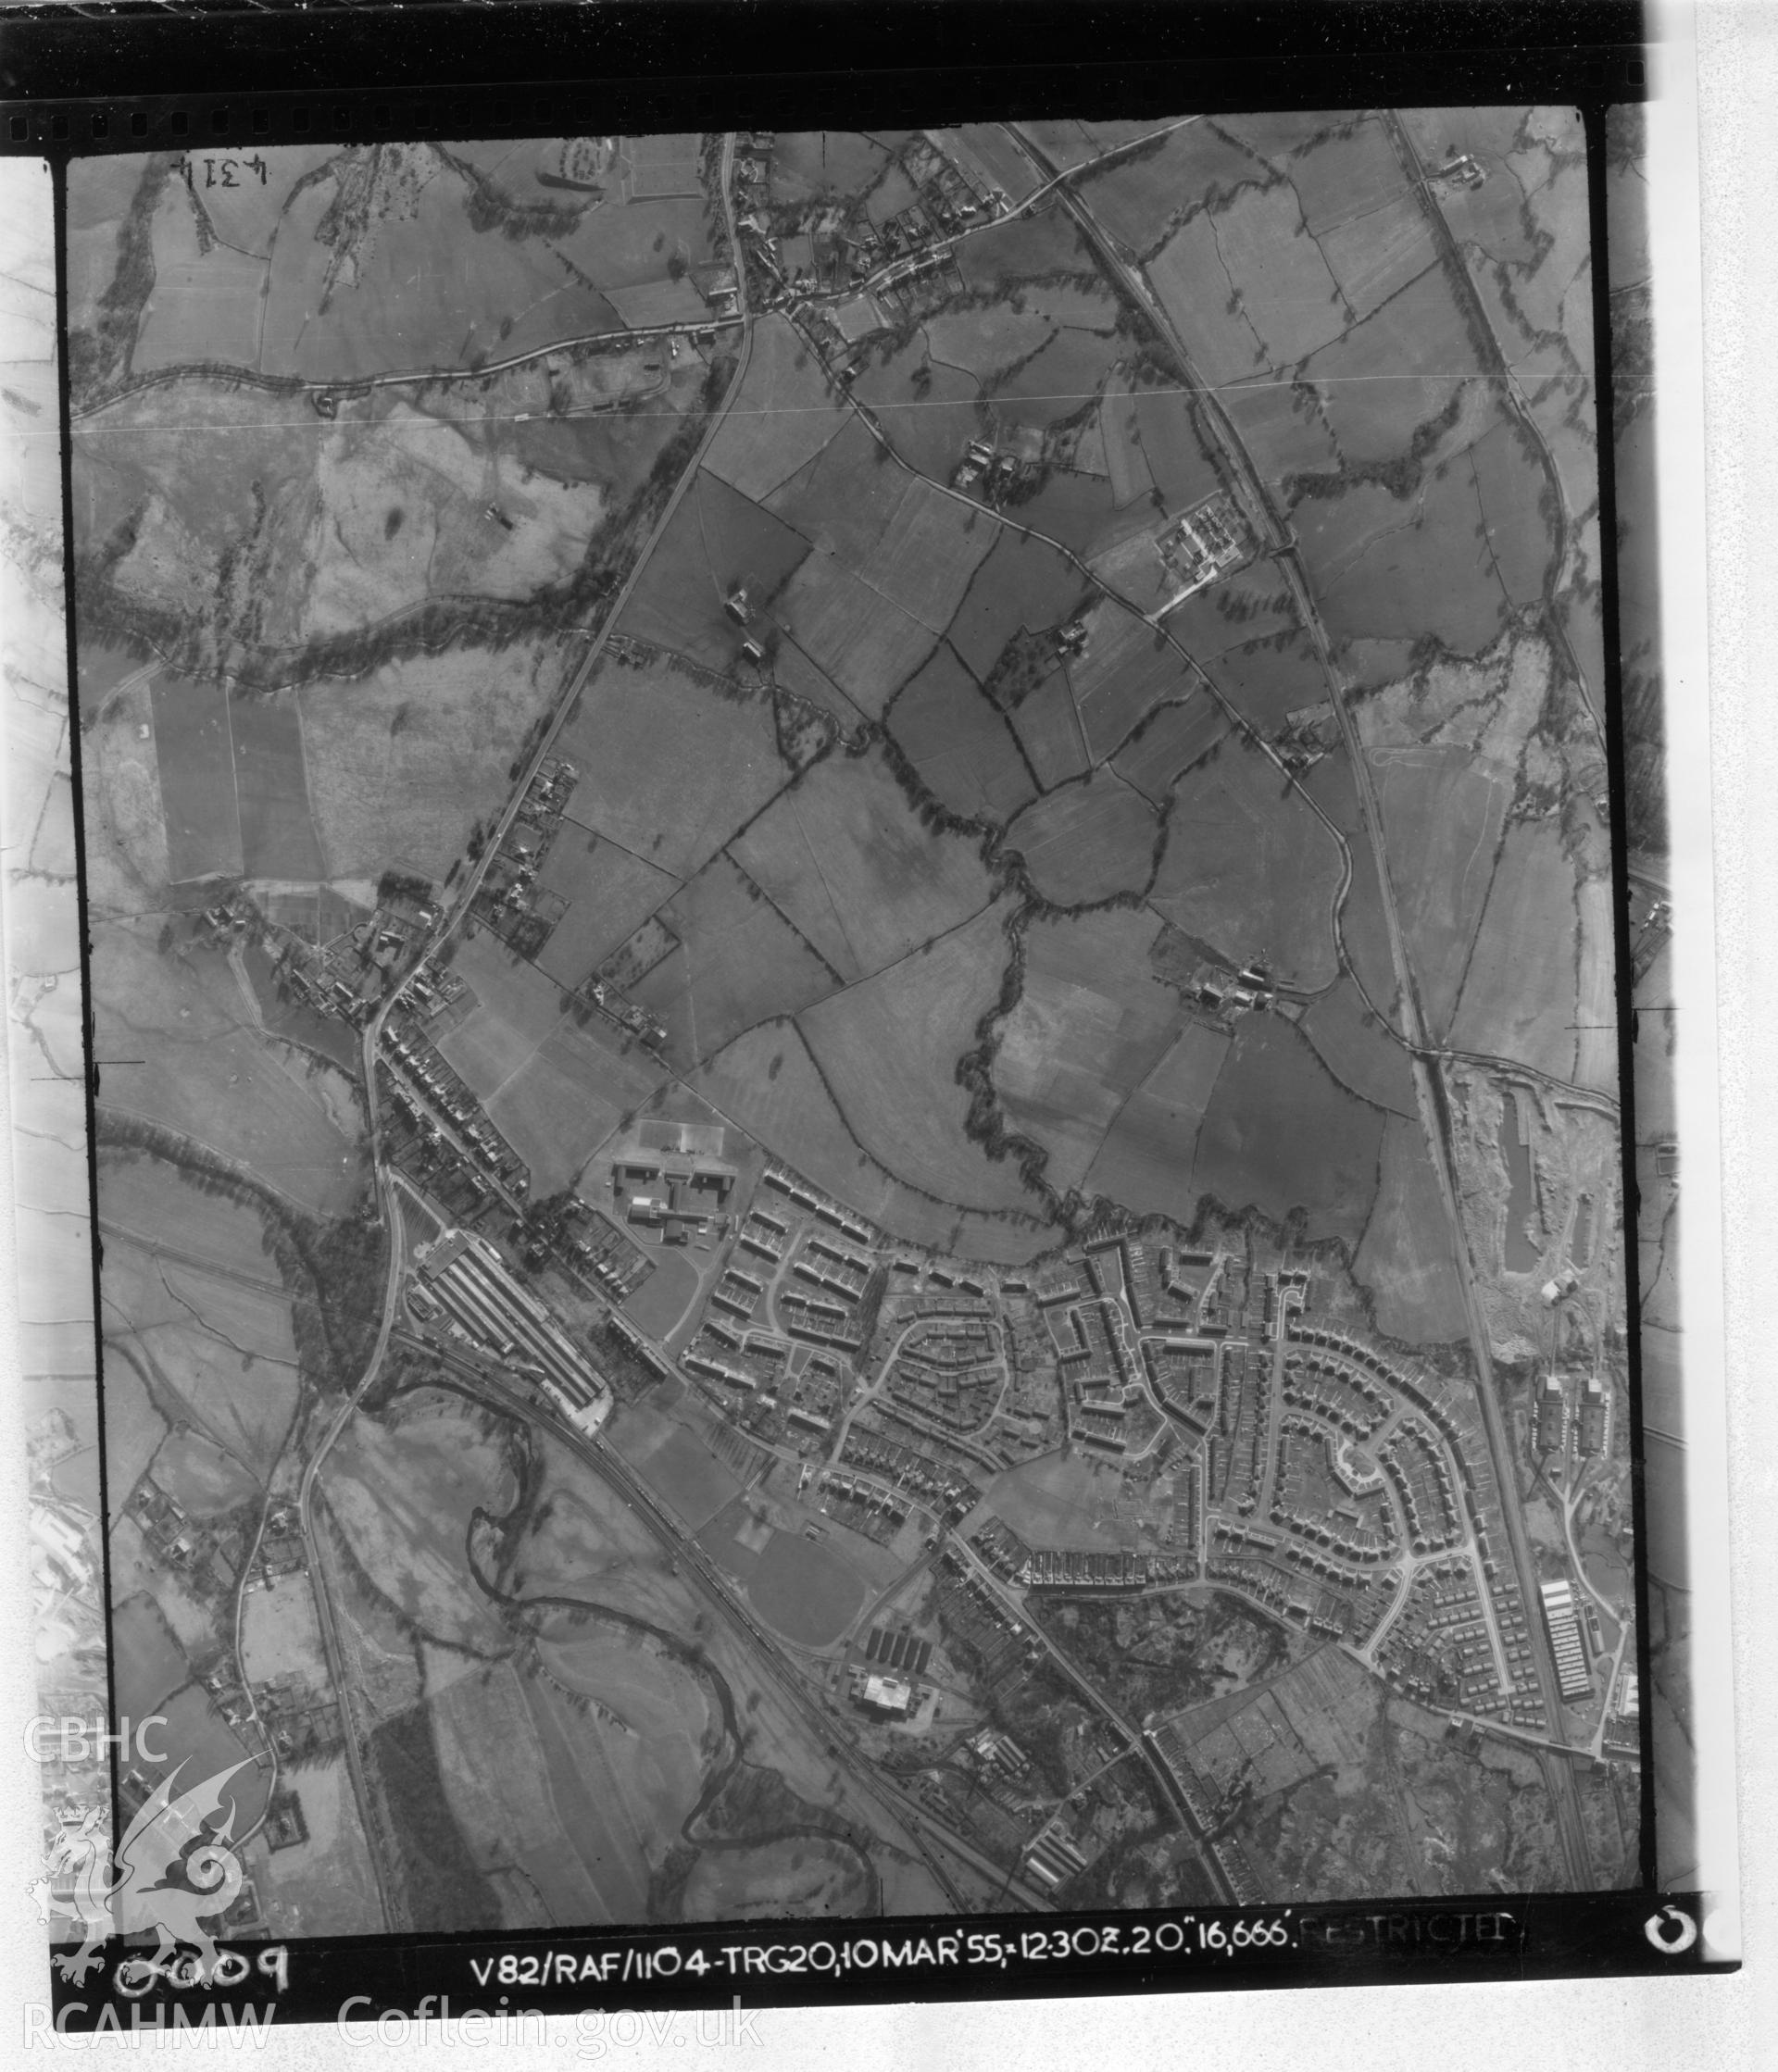 Aerial photograph of Cwmbran, taken on 10th March 1955. Included as part of Archaeology Wales' desk based assessment of former Llantarnam Community Primary School, Croeswen, Oakfield, Cwmbran, conducted in 2017.